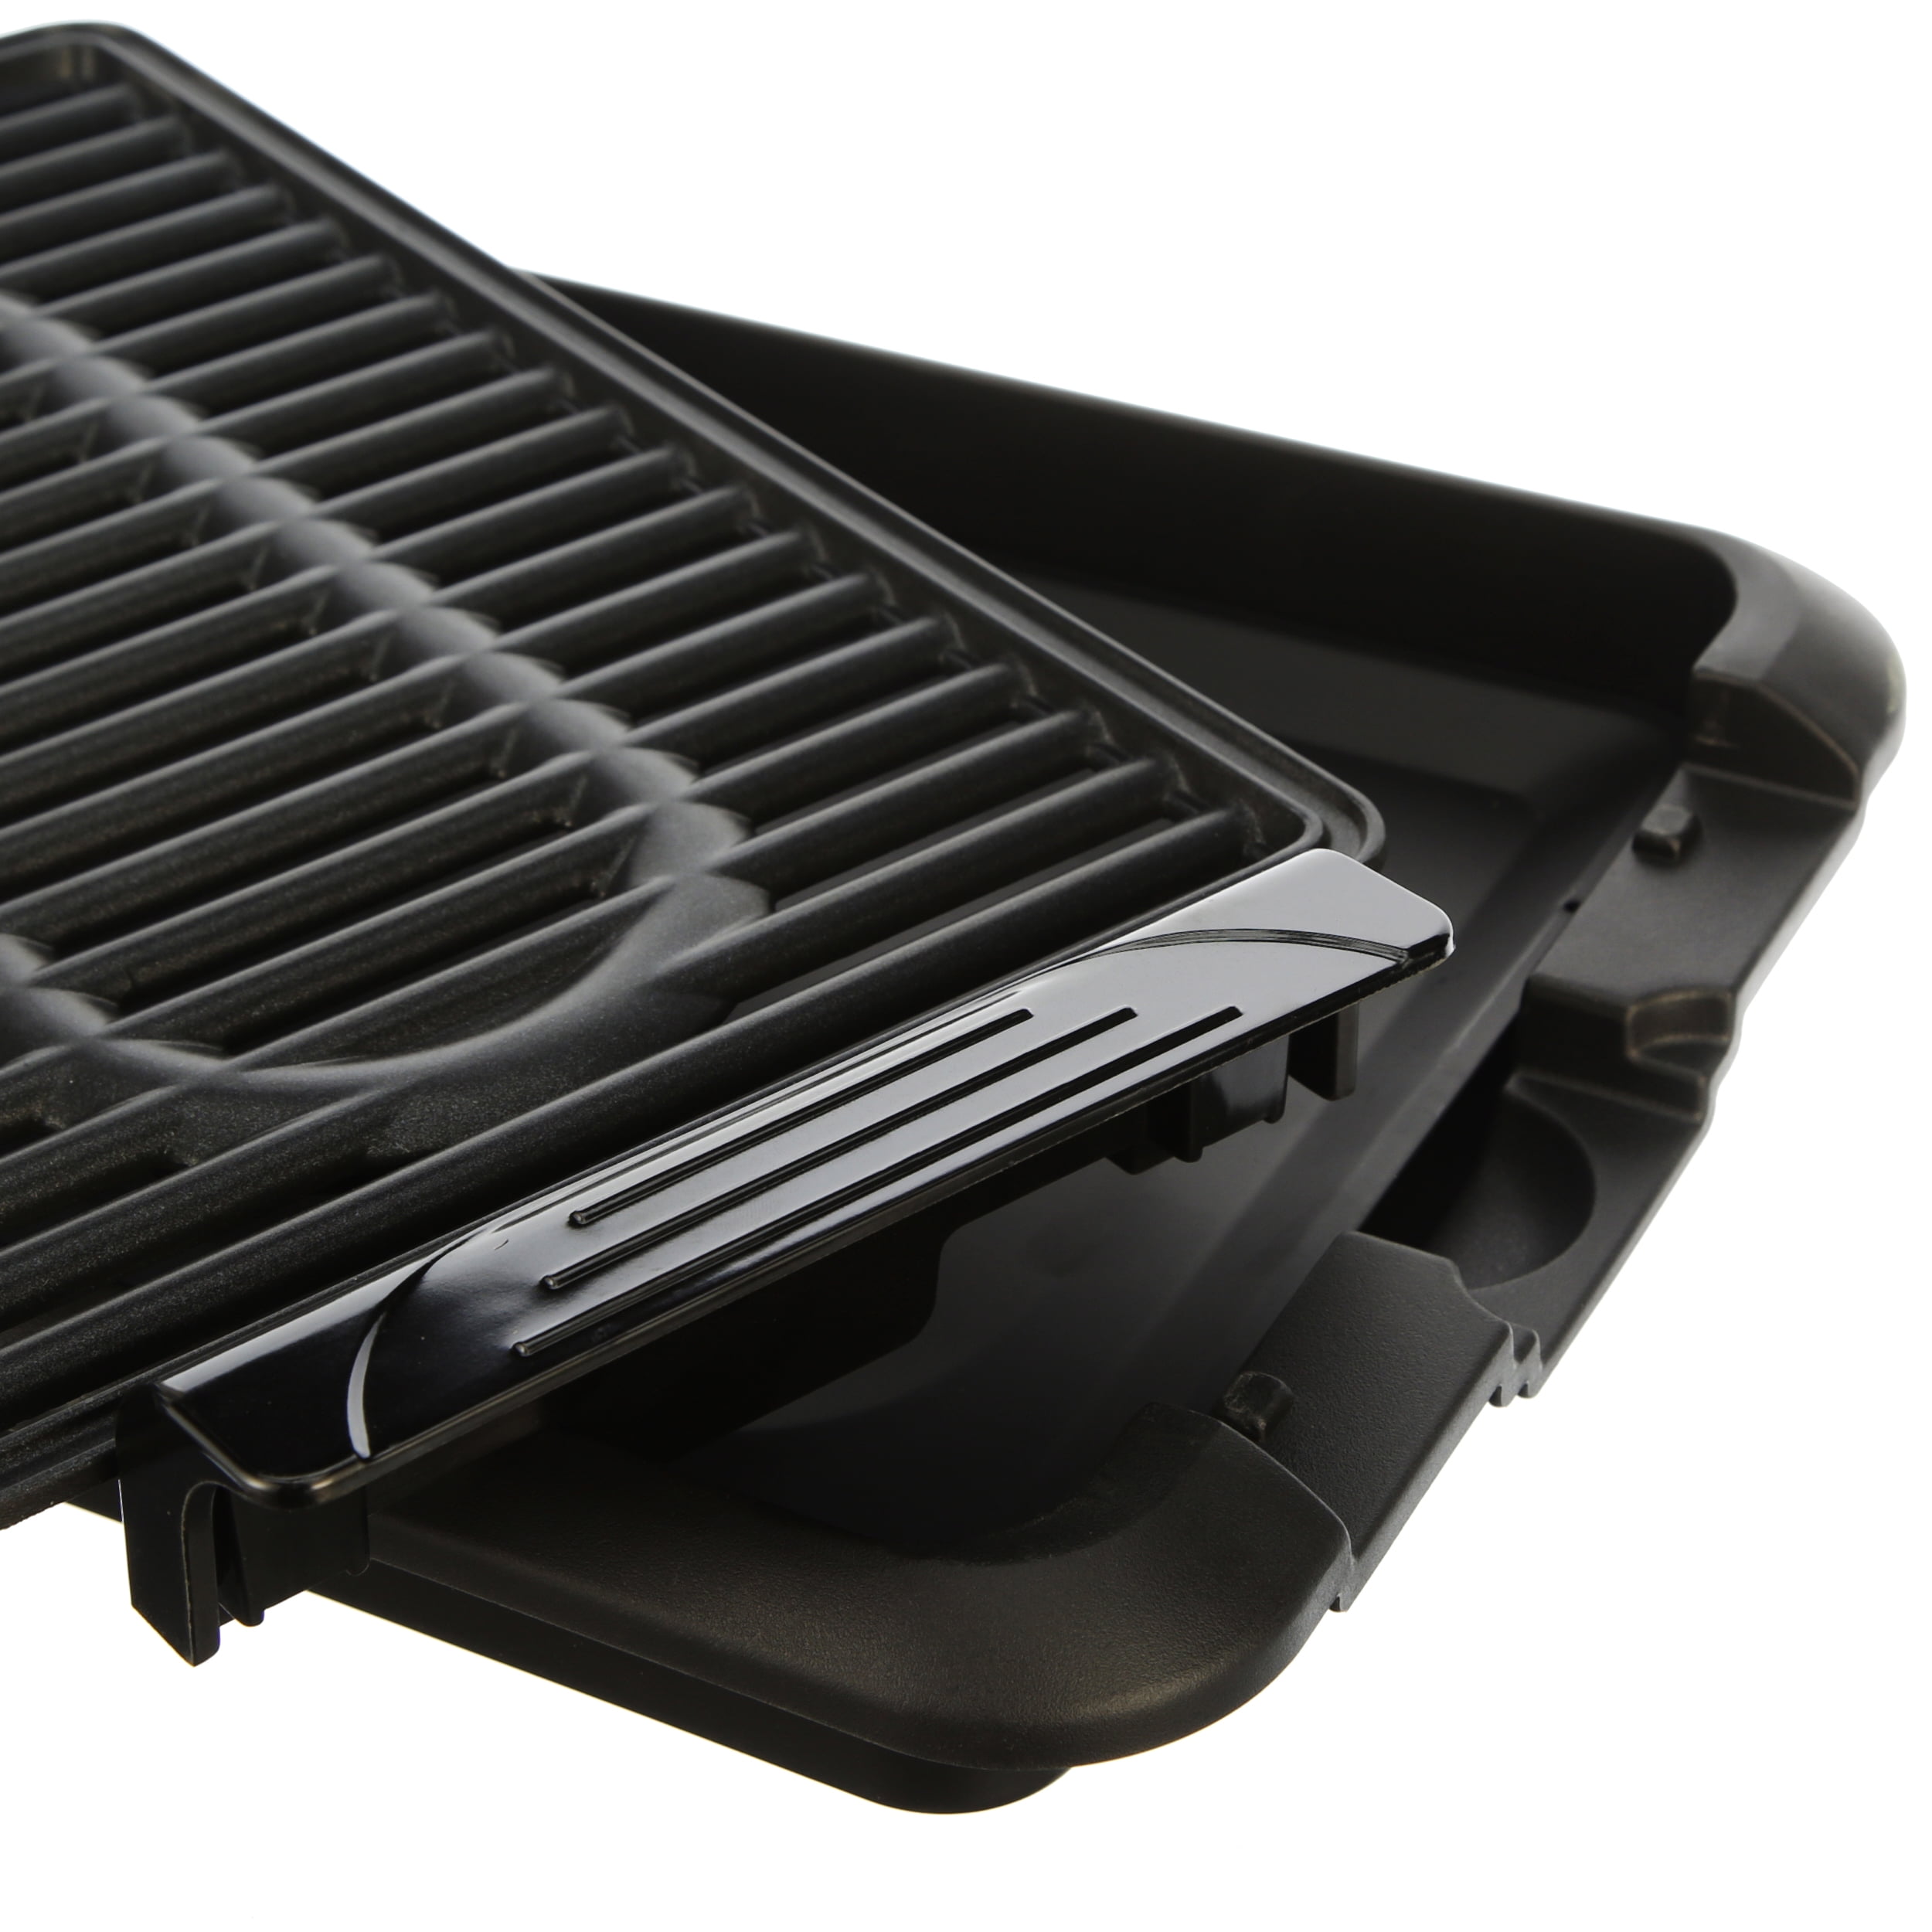 BROOKSTONE by KALORIK INDOOR ELECTRIC GRILL NON STICK FLAME FREE